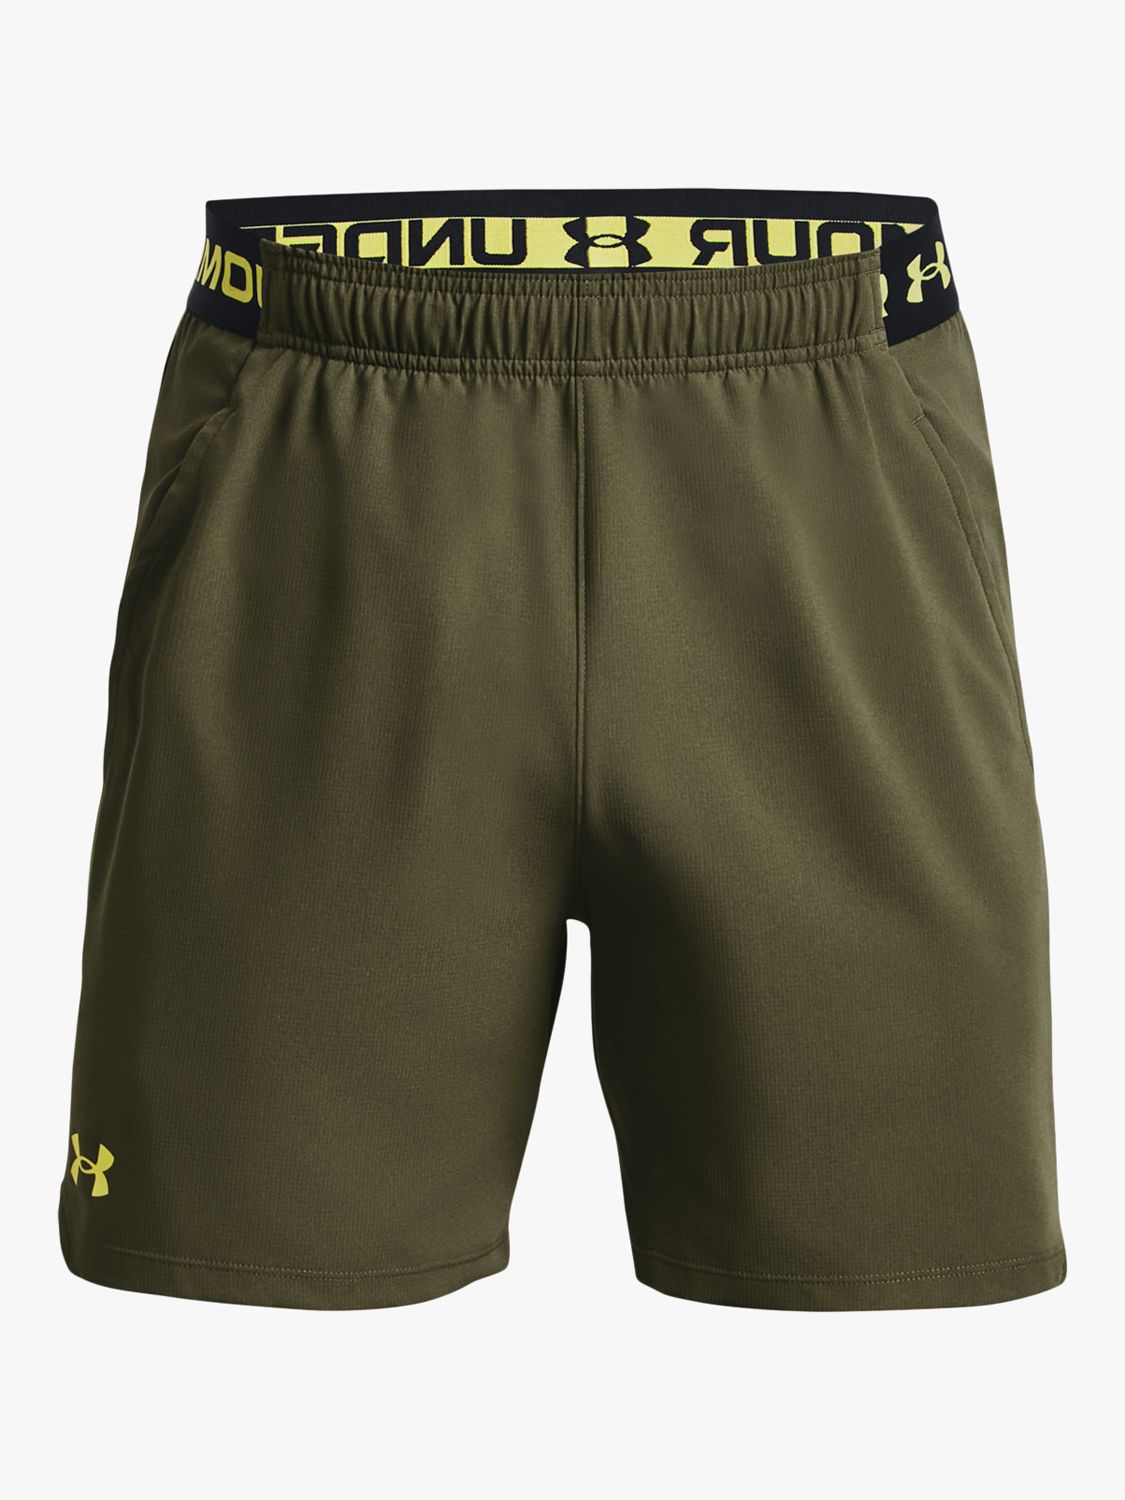 Under Armour Vanish Woven 6" Gym Shorts, Green/Limeyellow, L